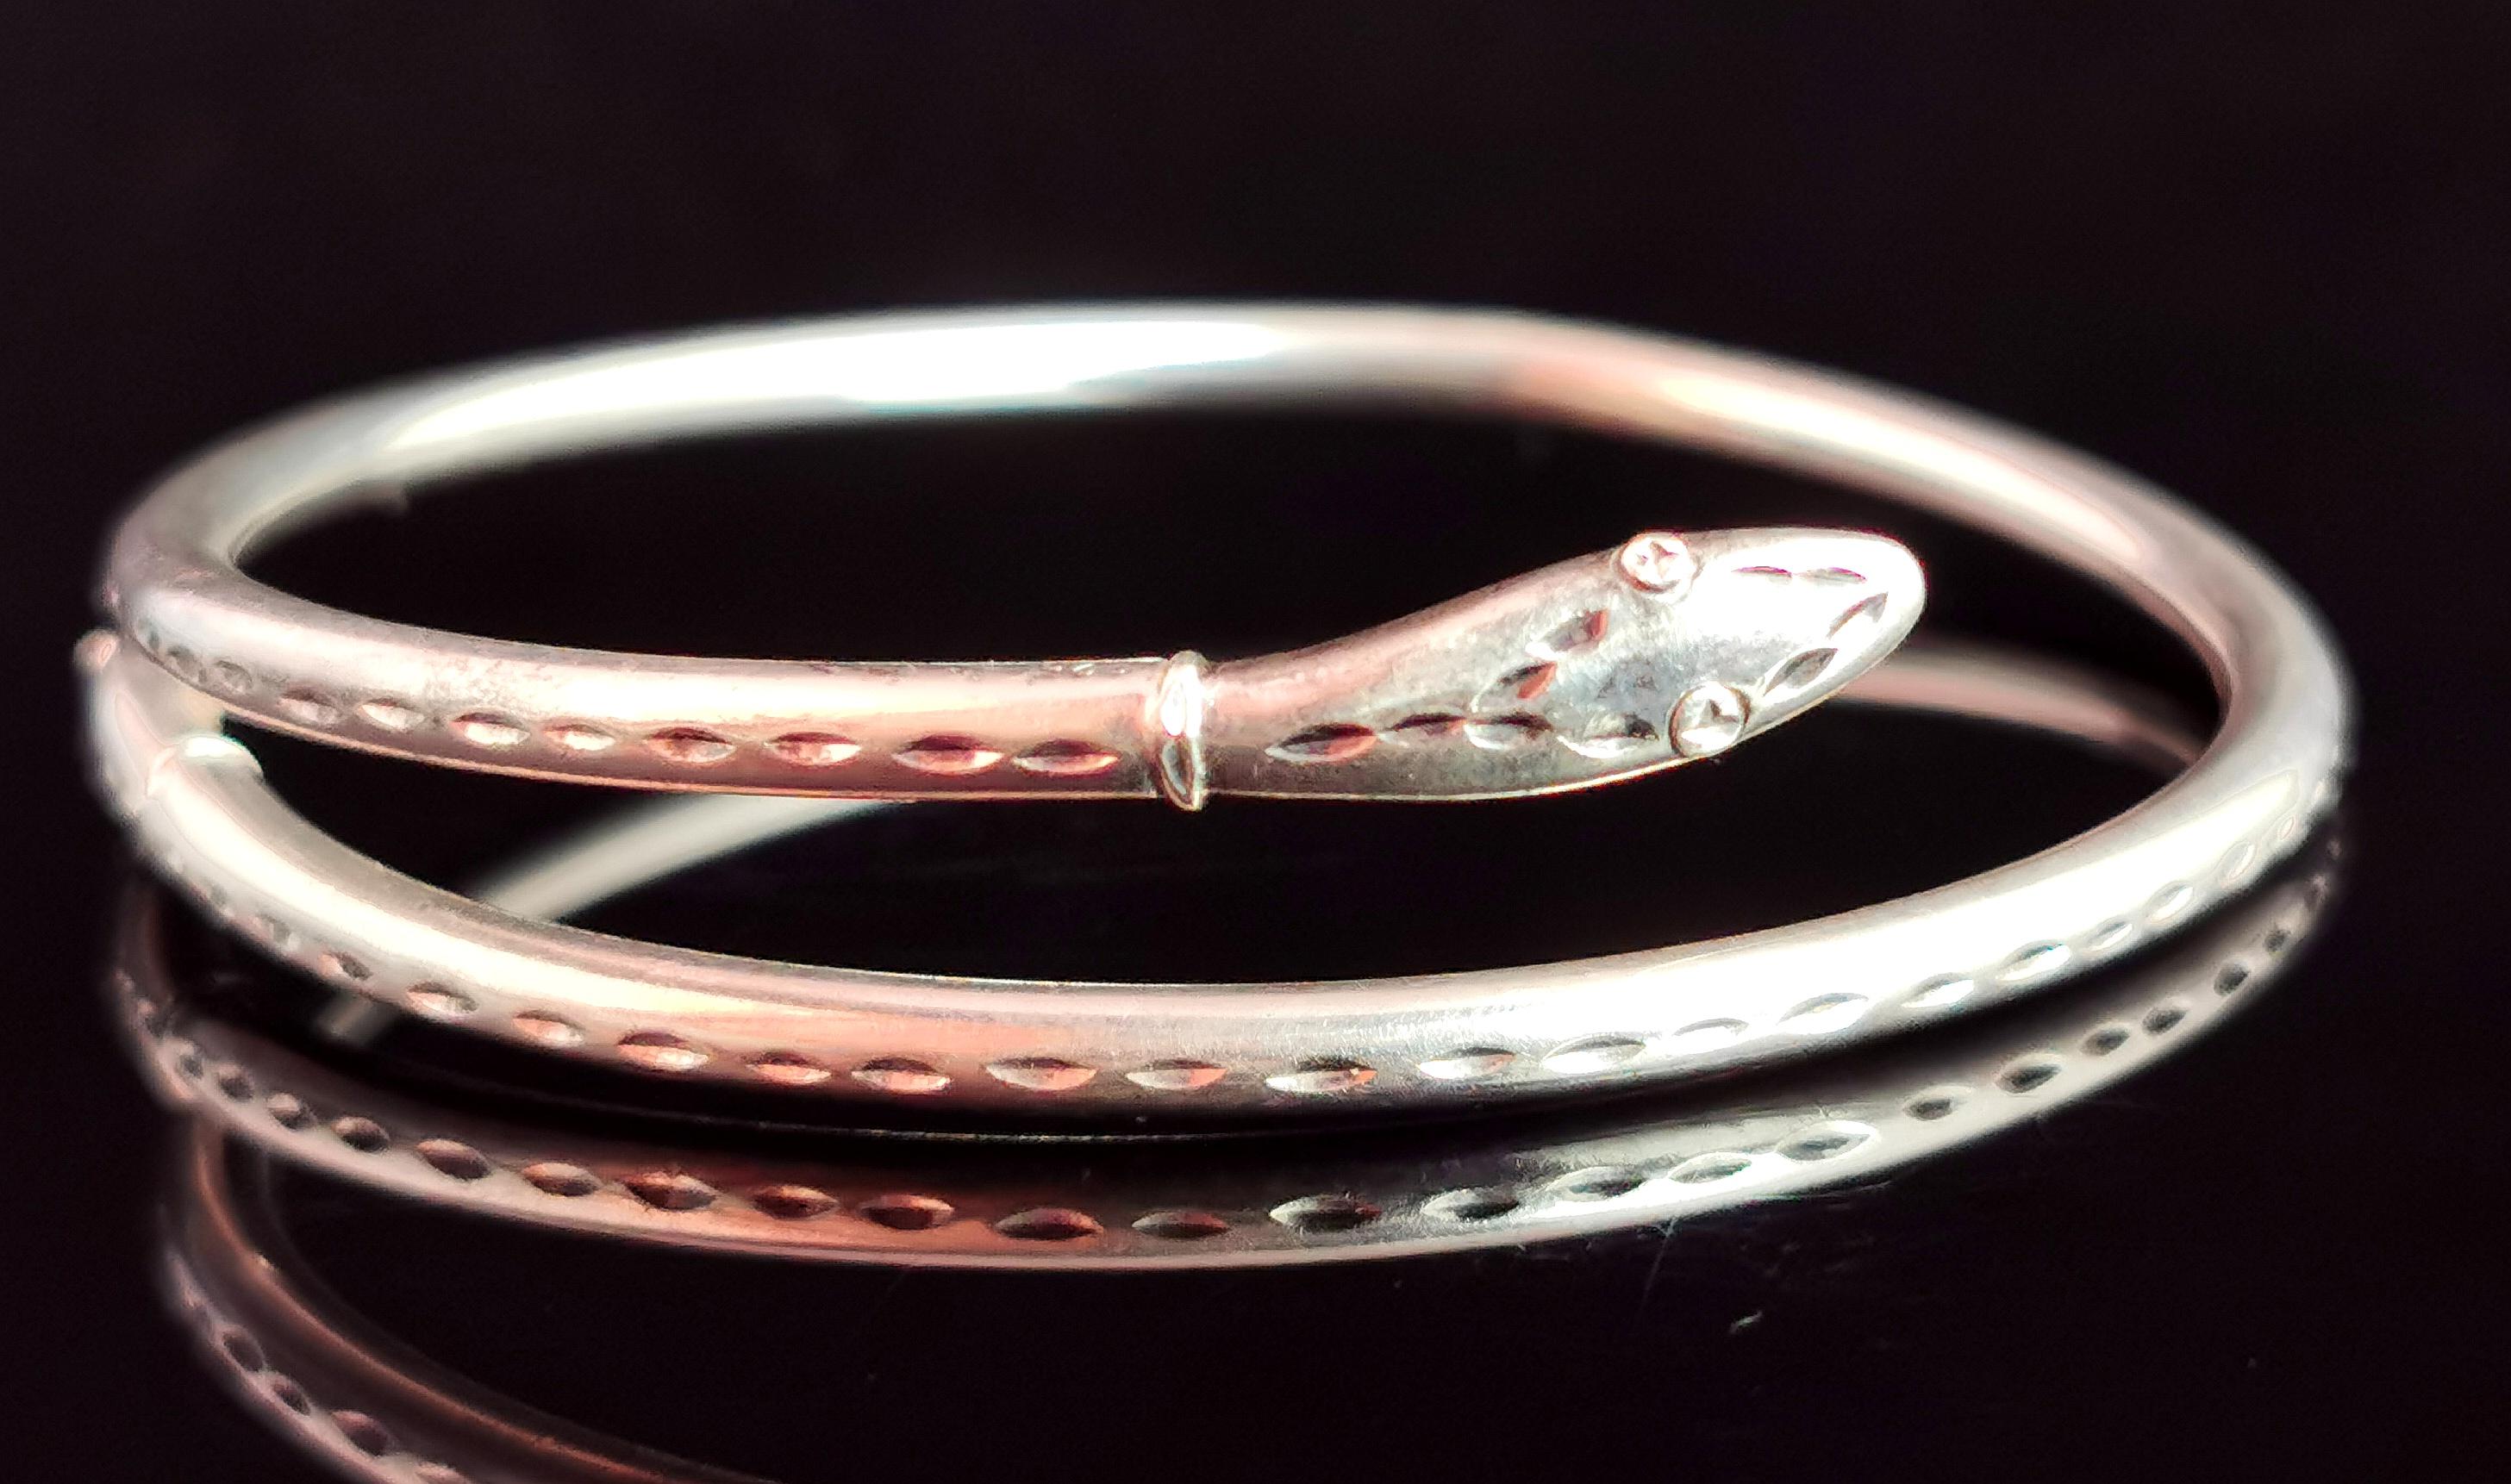 A sweet vintage sterling silver snake bangle.

It is a cross over bangle with two snake heads either side, the body of the bangle is made up from a slender sterling silver band, lightly engraved.

Designed in an Art Deco style, reminiscent of the